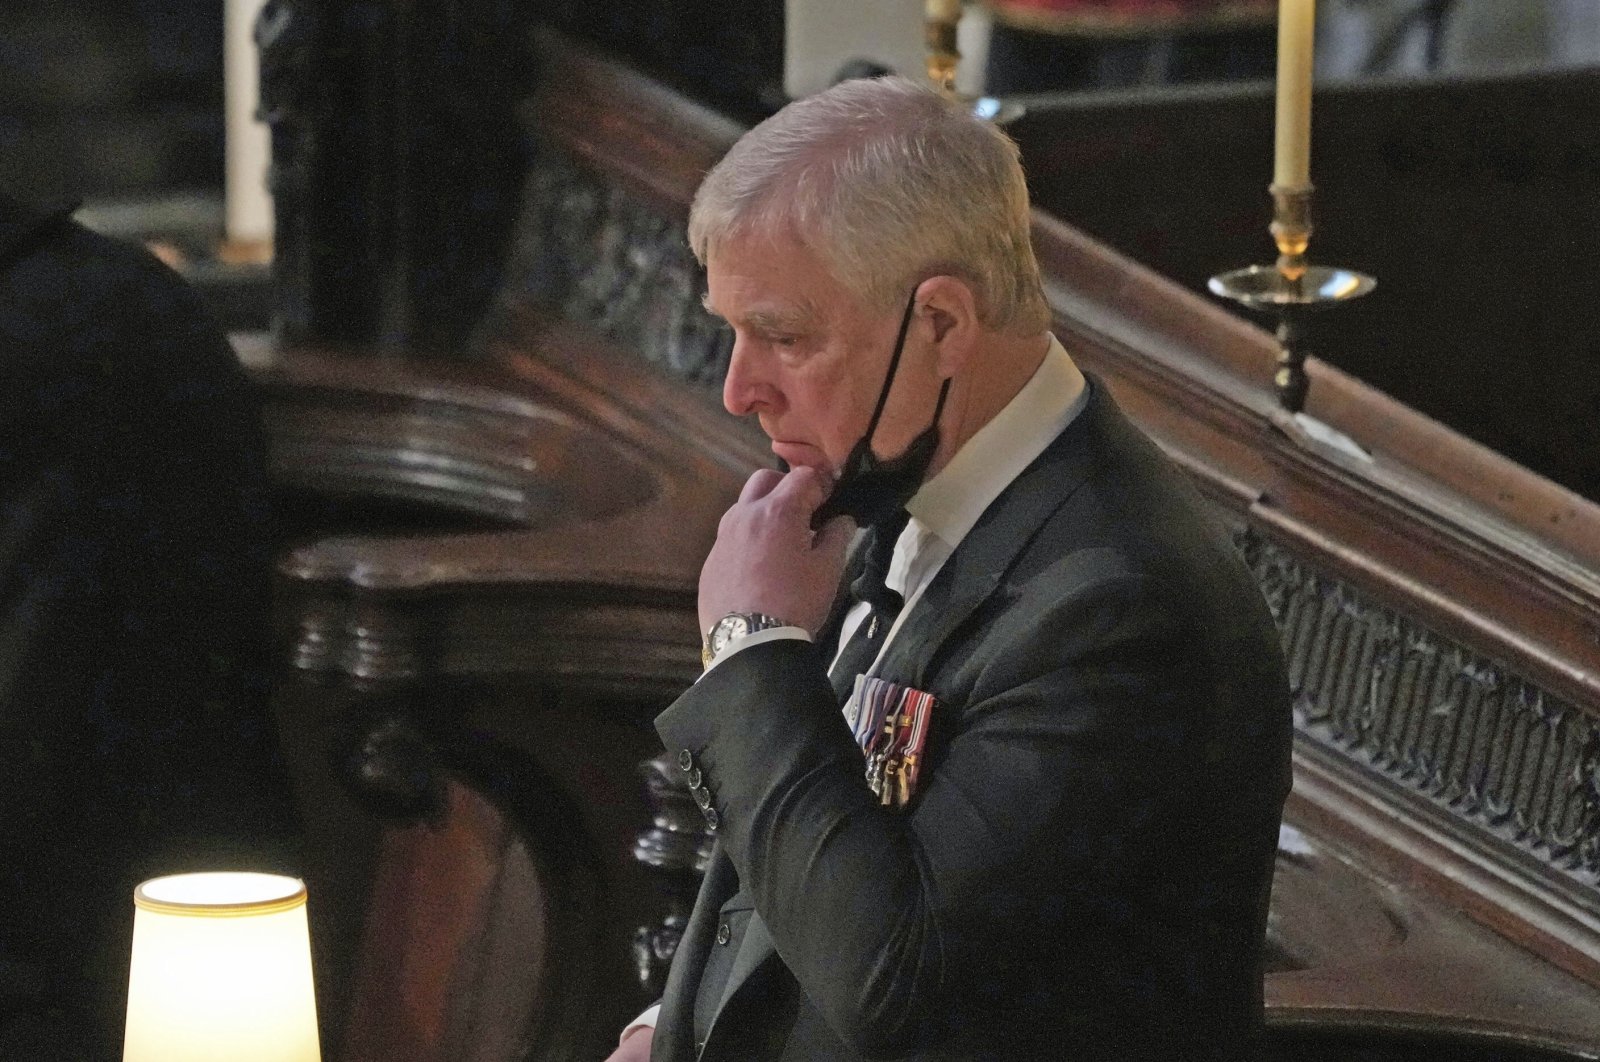 Britain's Prince Andrew stands inside St. George's Chapel during the funeral of his father, Prince Philip, at Windsor Castle, Windsor, England, April 17, 2021. (AP Photo)